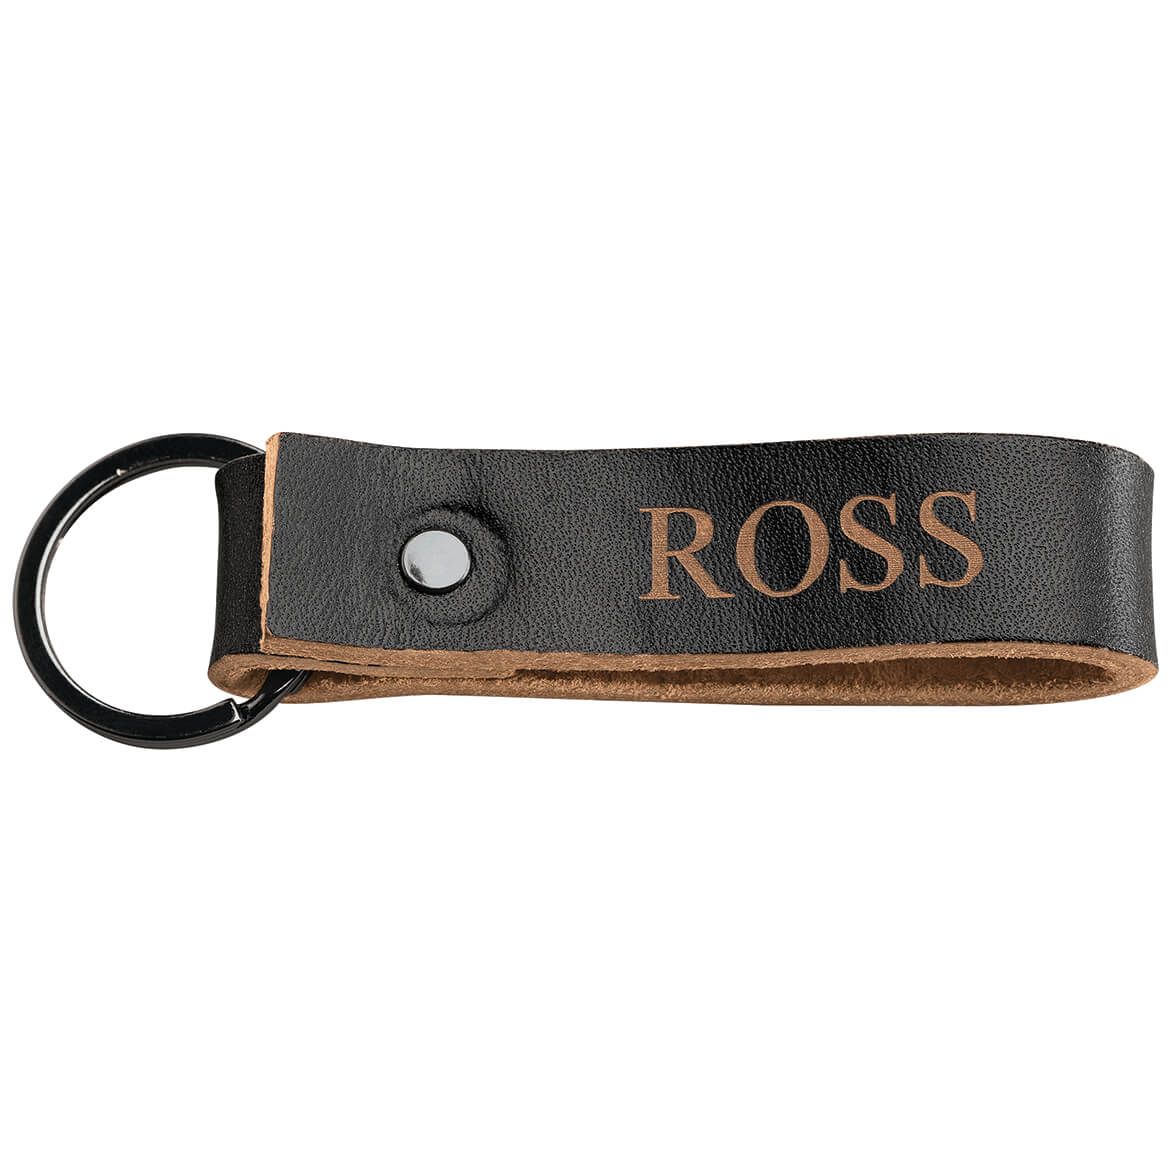 Personalized Leather Key FOB + '-' + 370992